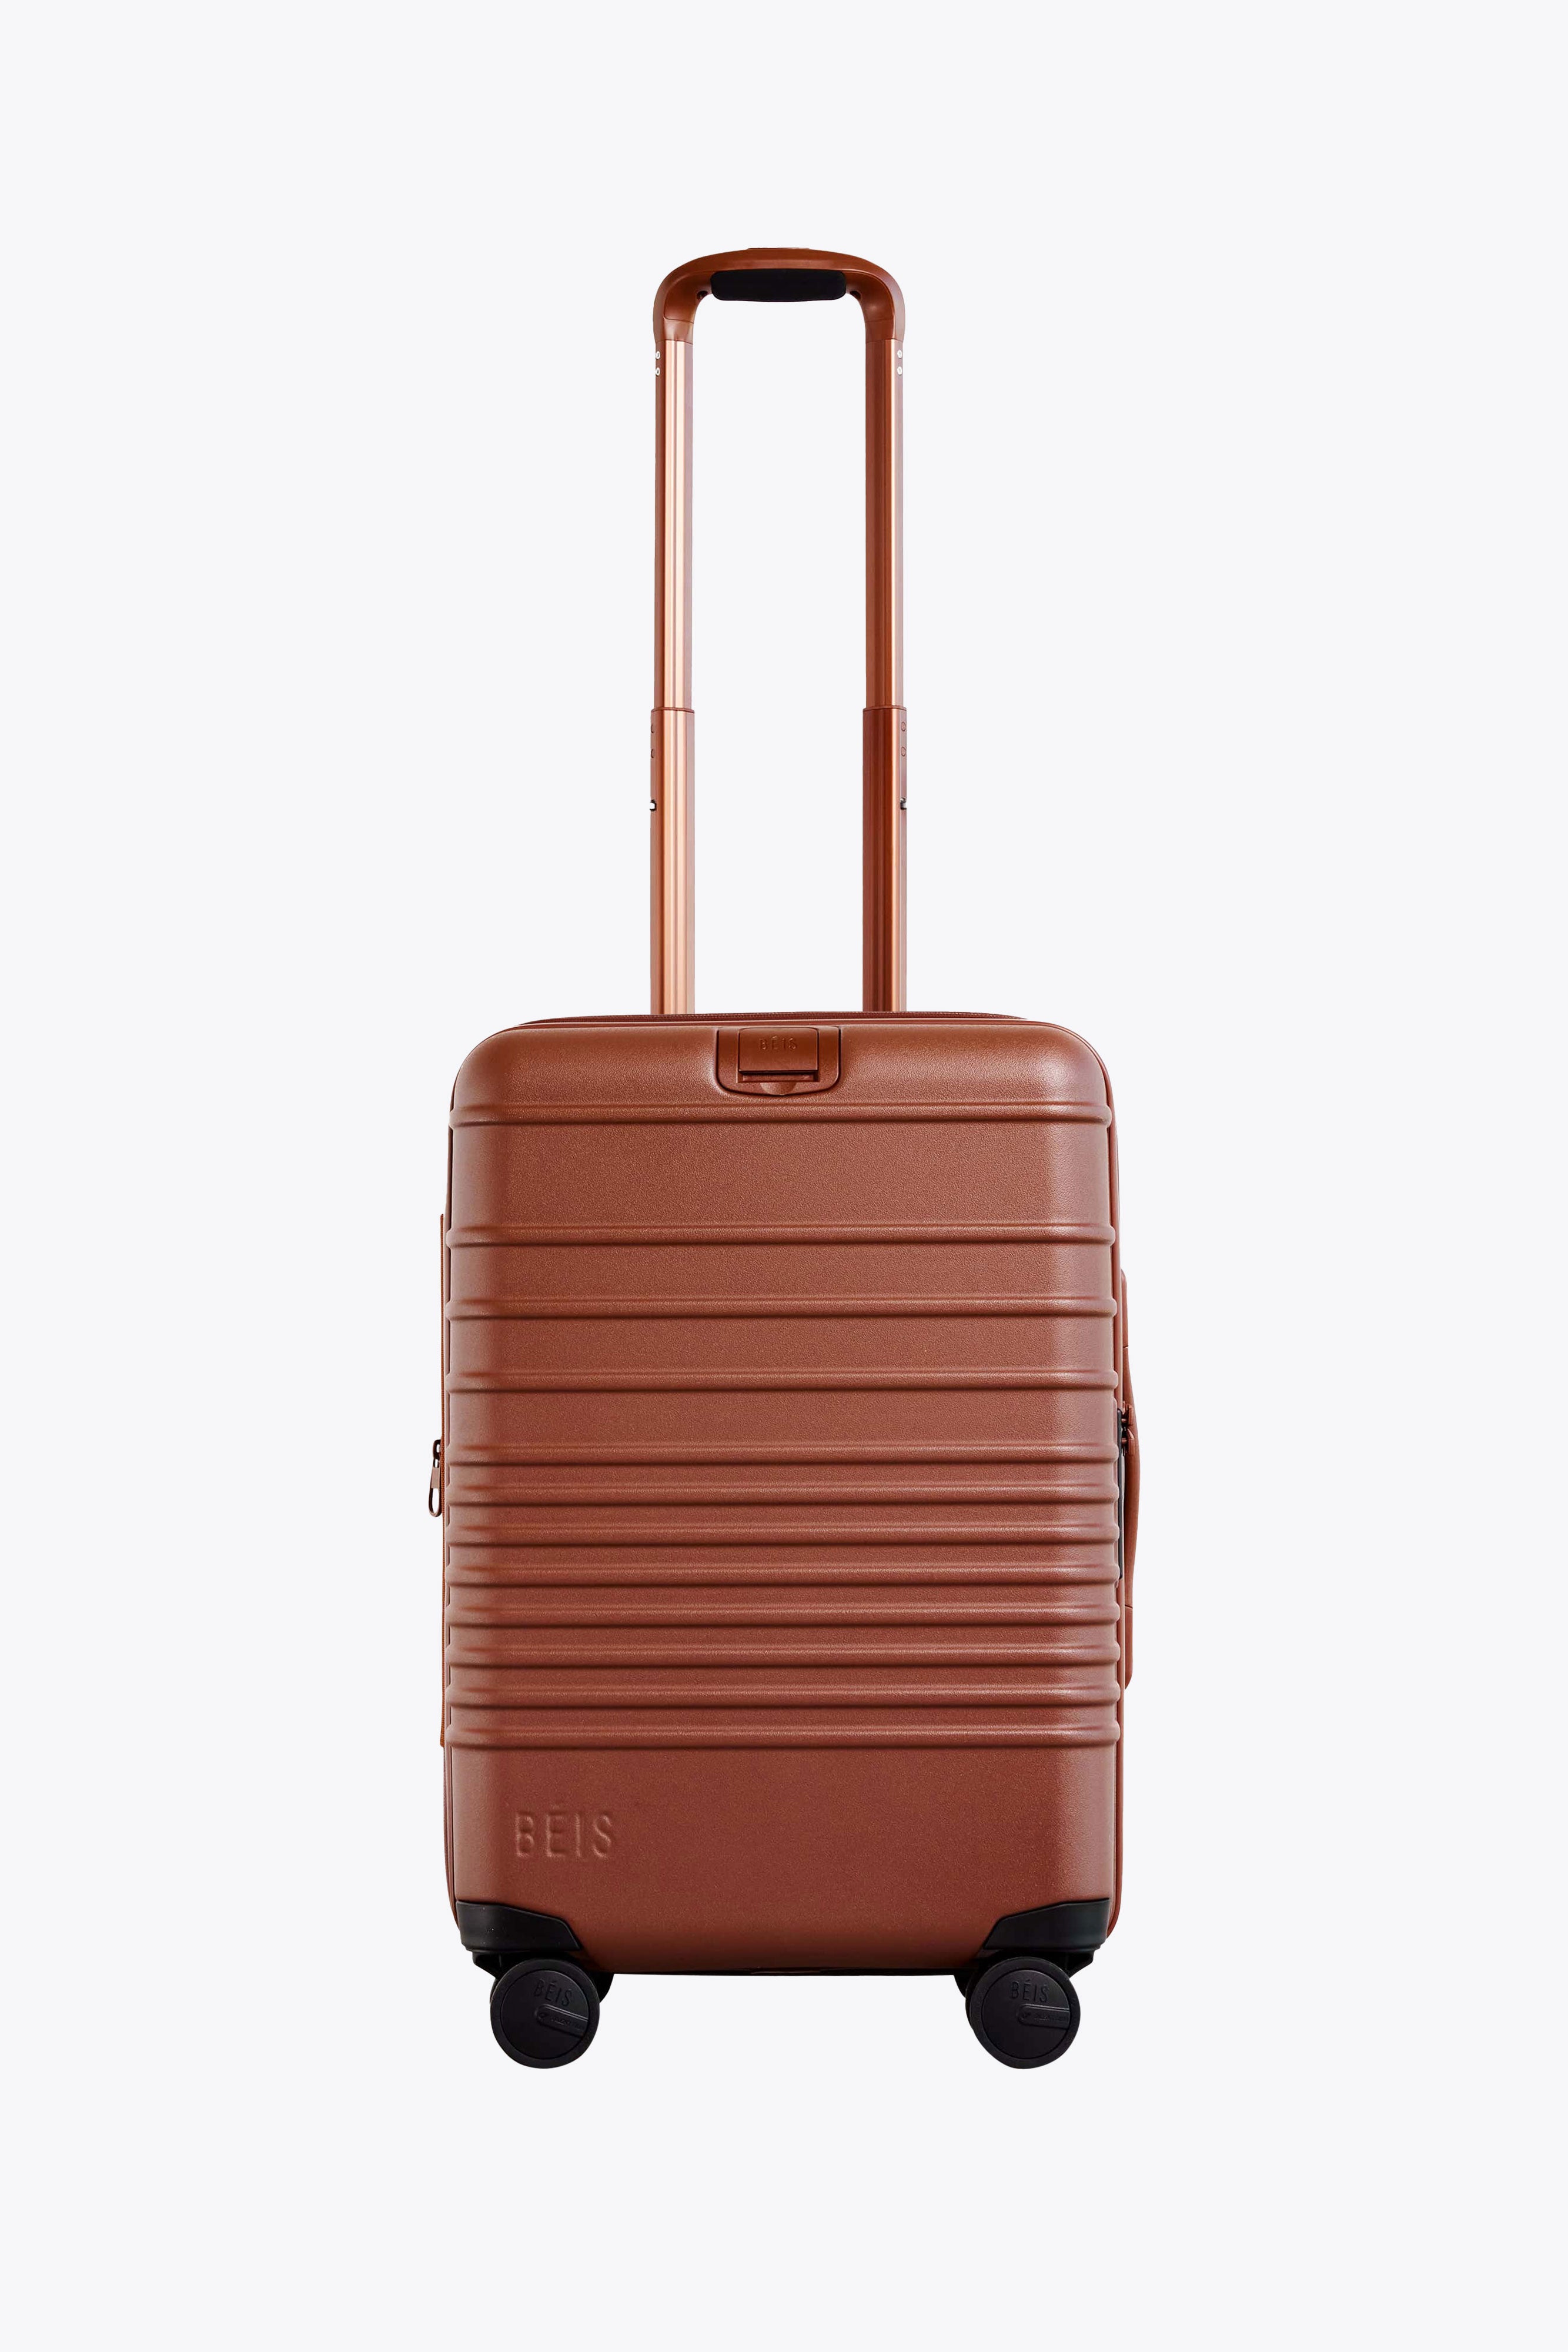 Travel With This Luggage and You'll Never Lose a Wheel | theSkimm